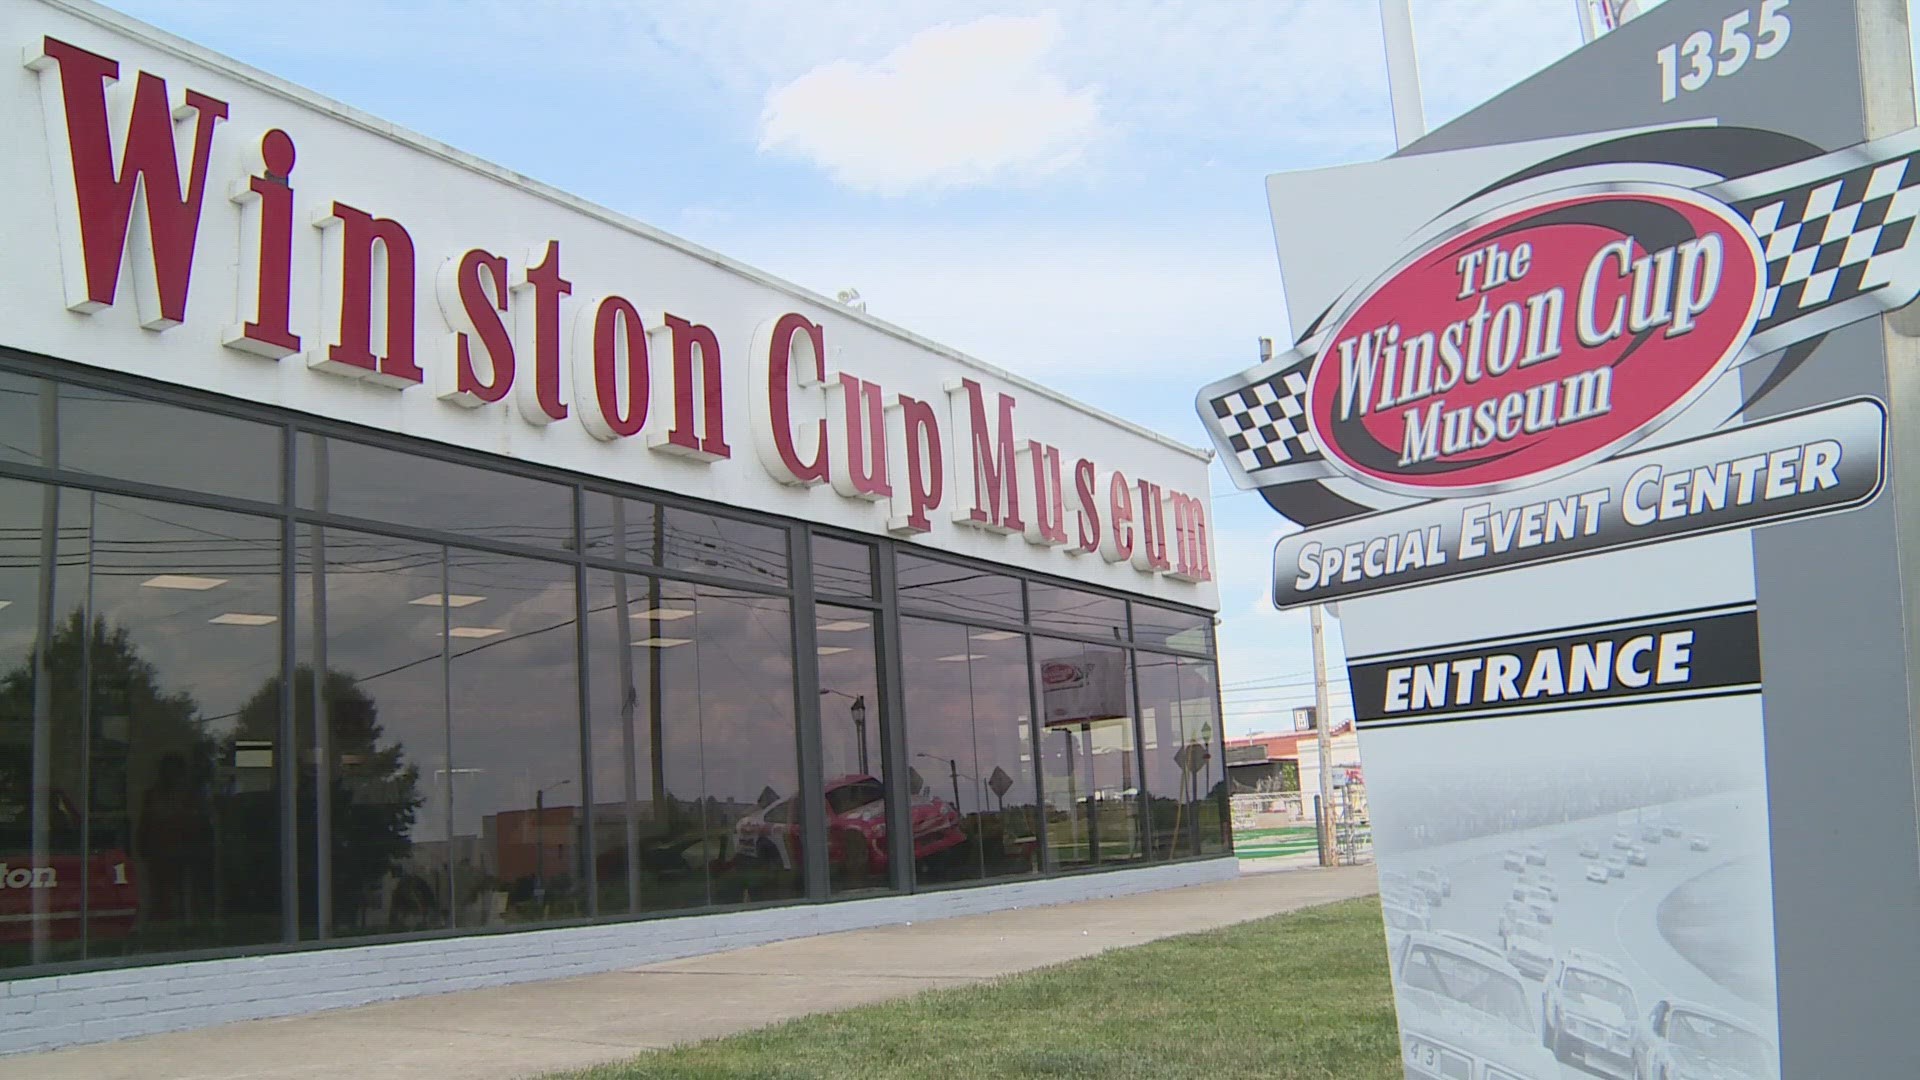 "Iconic" Winston-Salem museum set to close after fighting multiple lawsuits.